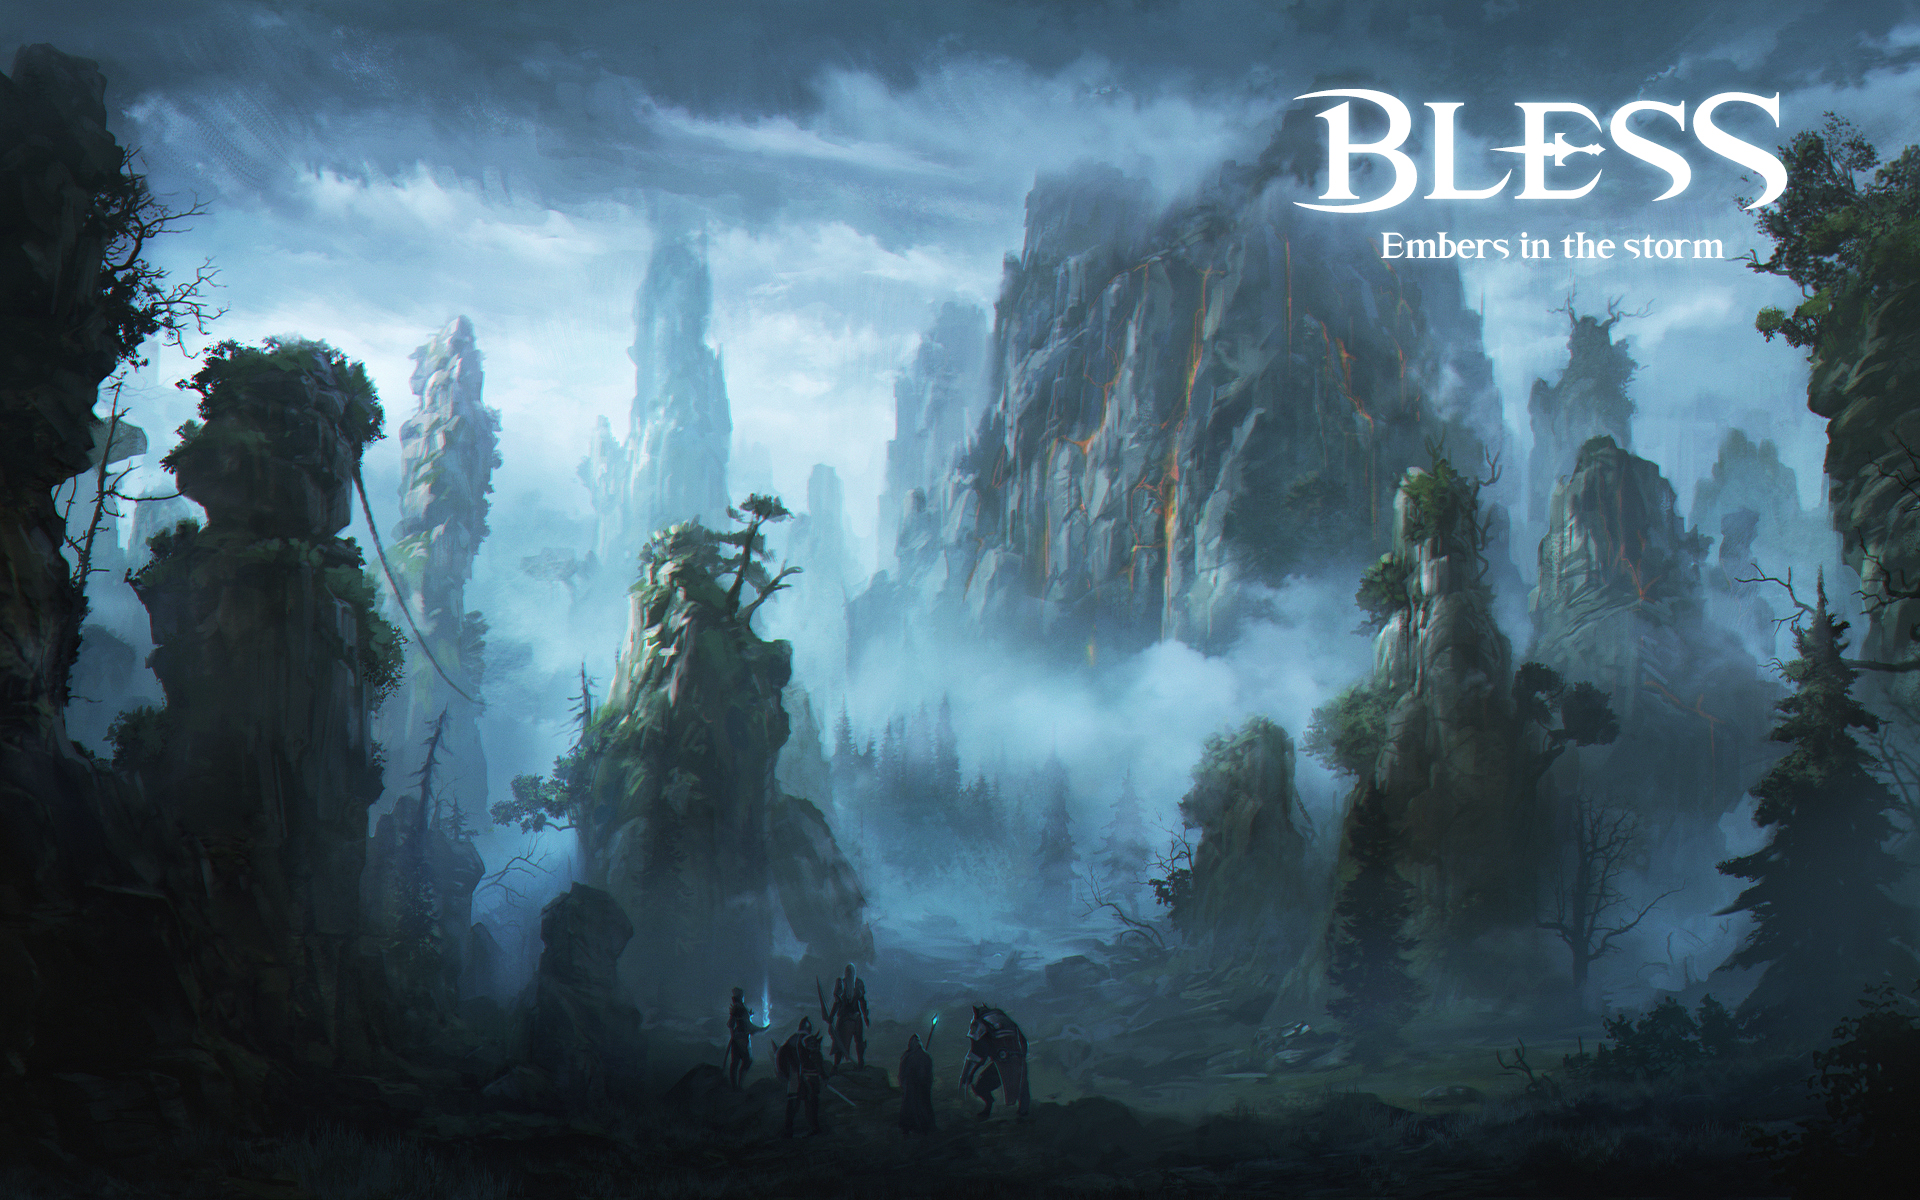 Bless Online Wallpapers Pictures Images HD Wallpapers Download Free Map Images Wallpaper [wallpaper376.blogspot.com]